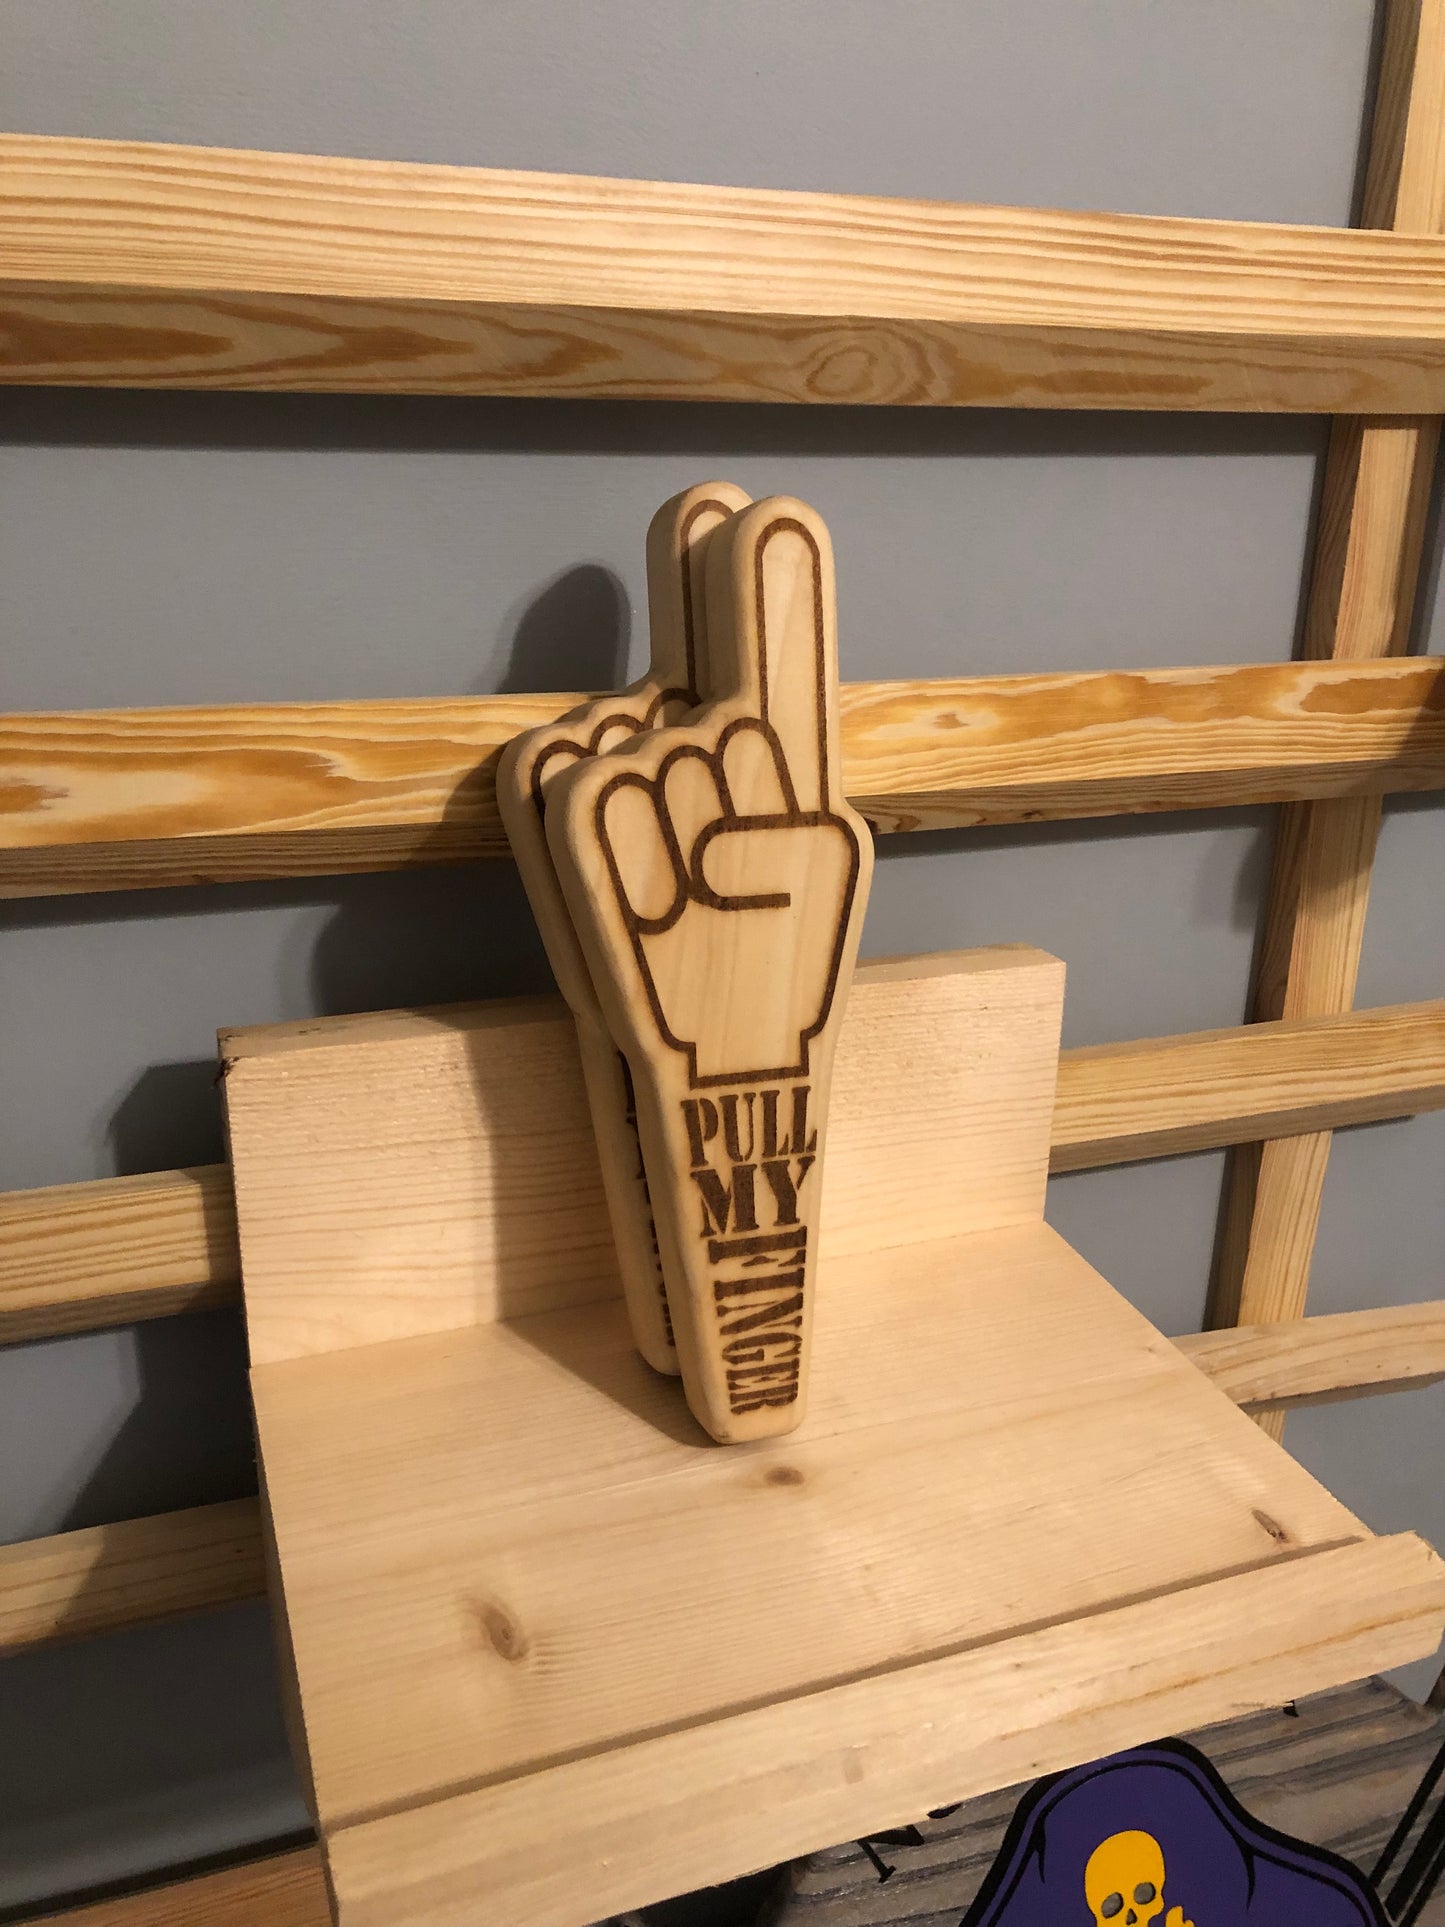 Pull my finger tap handle